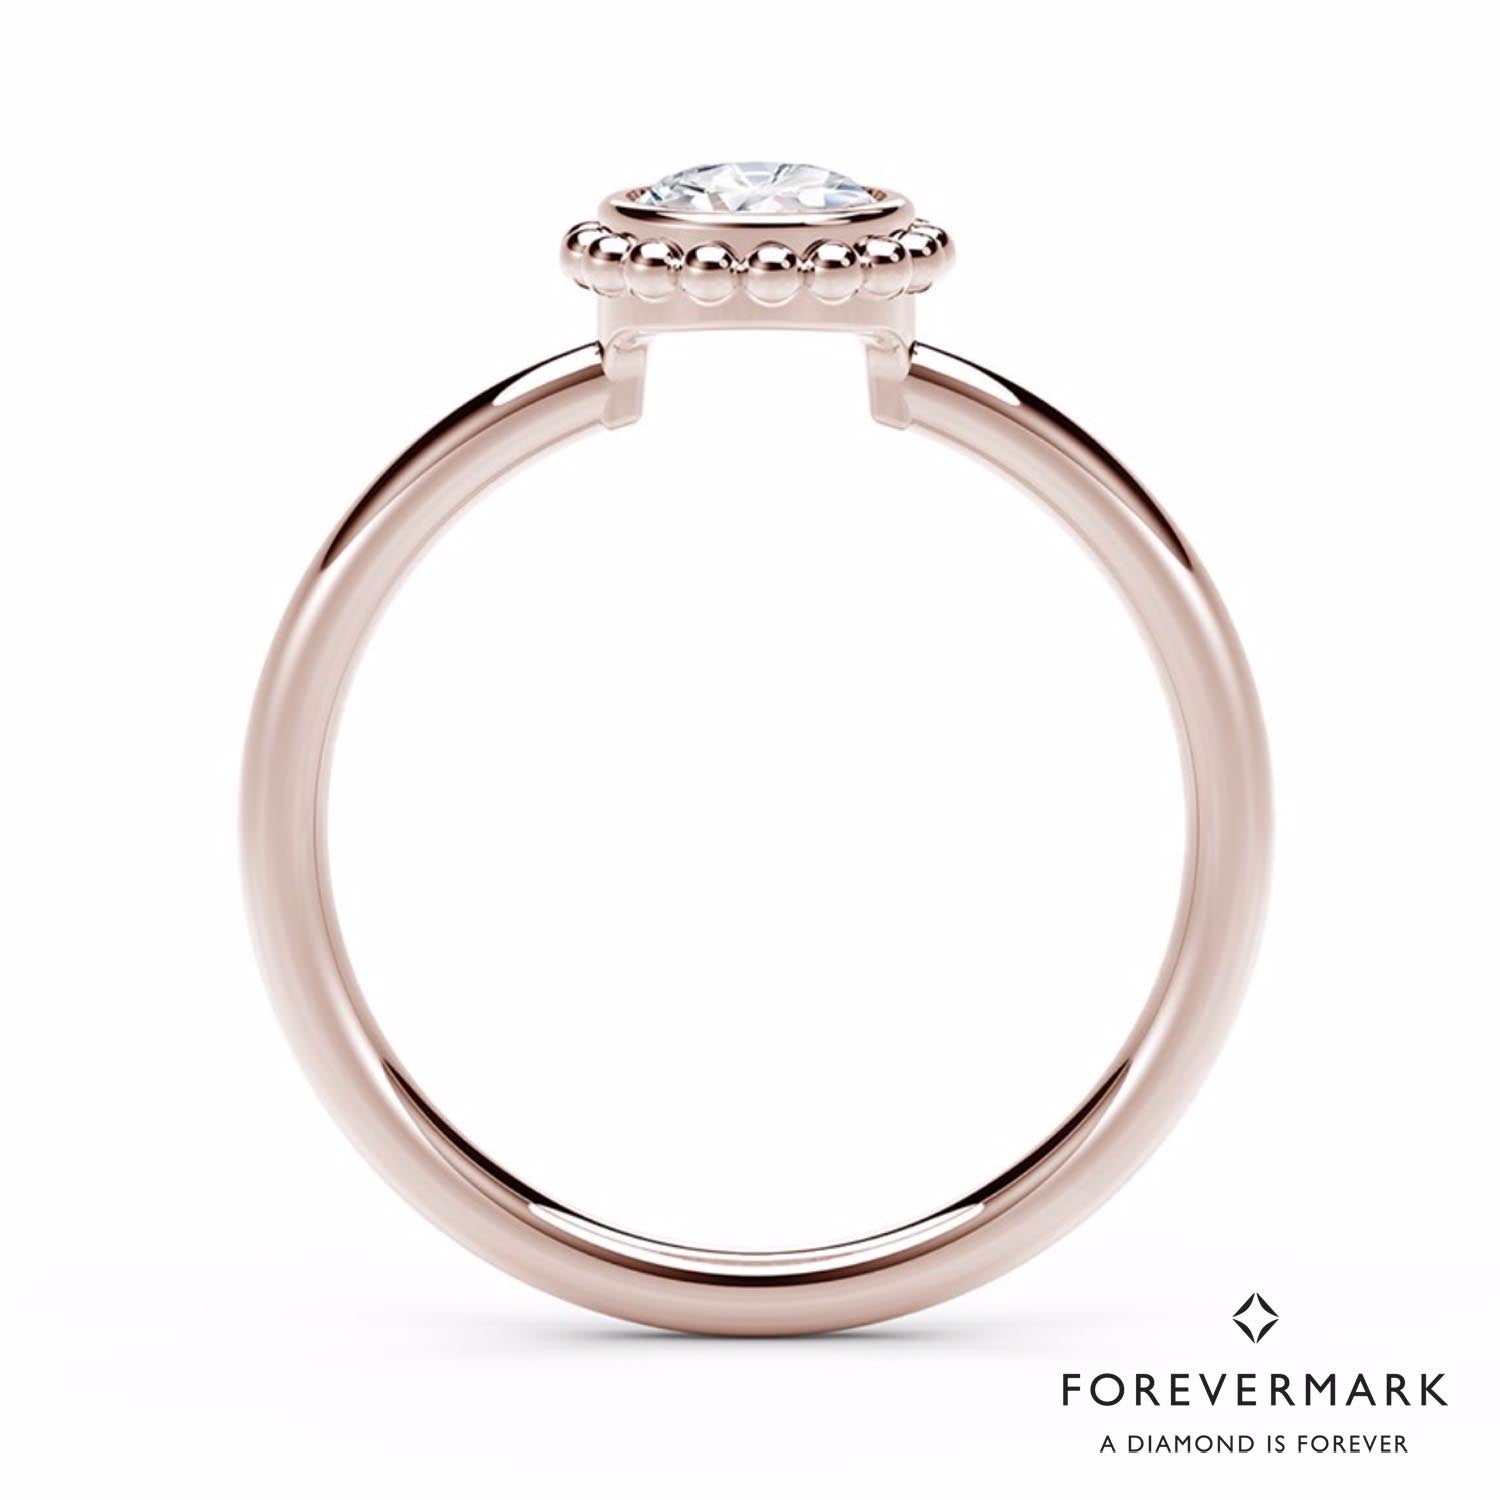 De Beers Forevermark Tribute Collection Beaded Bezel Ring in 18kt Rose Gold (1/2ct)